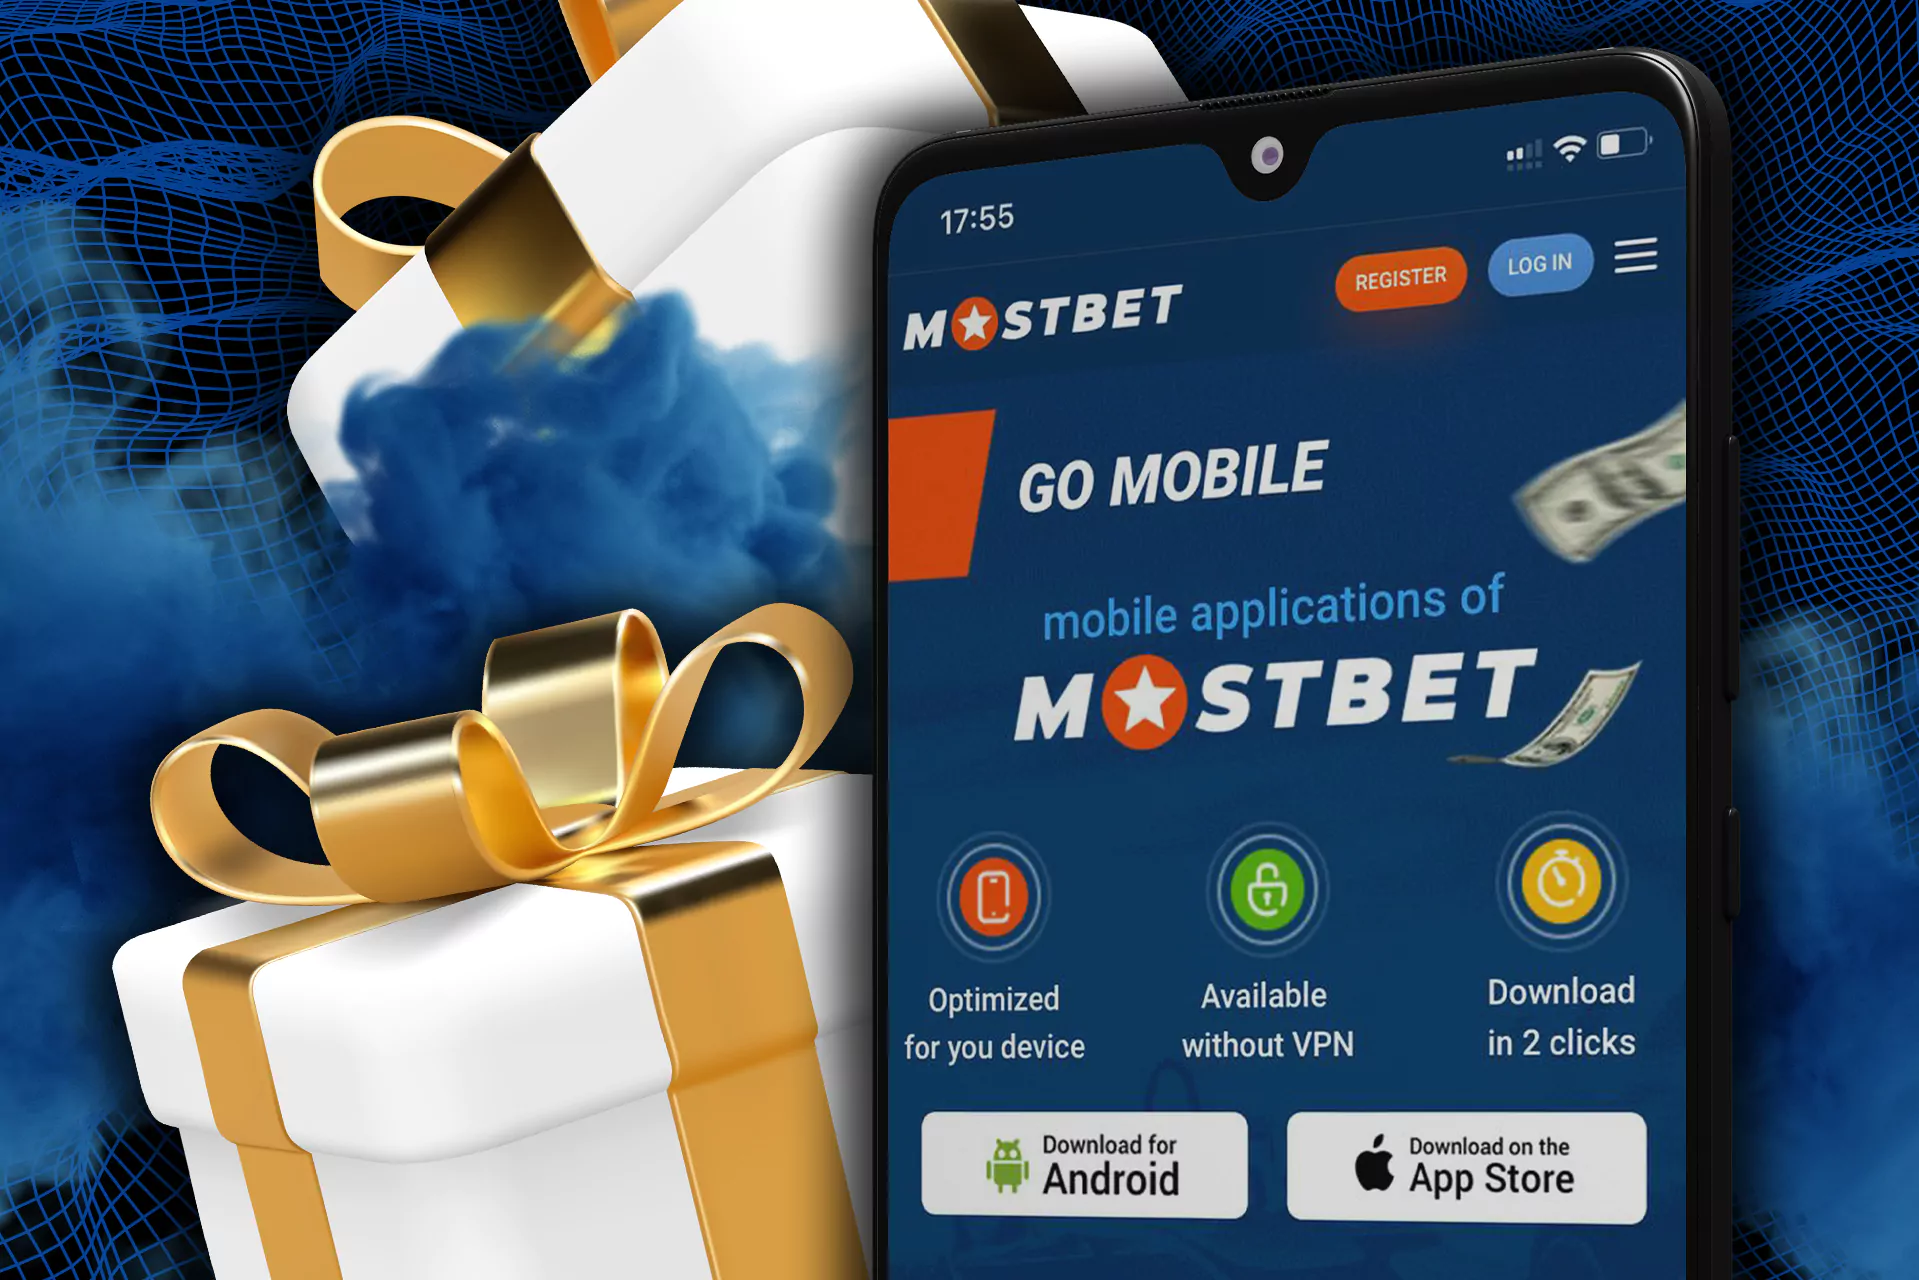 Download the Mostbet mobile app and get your bonus there.